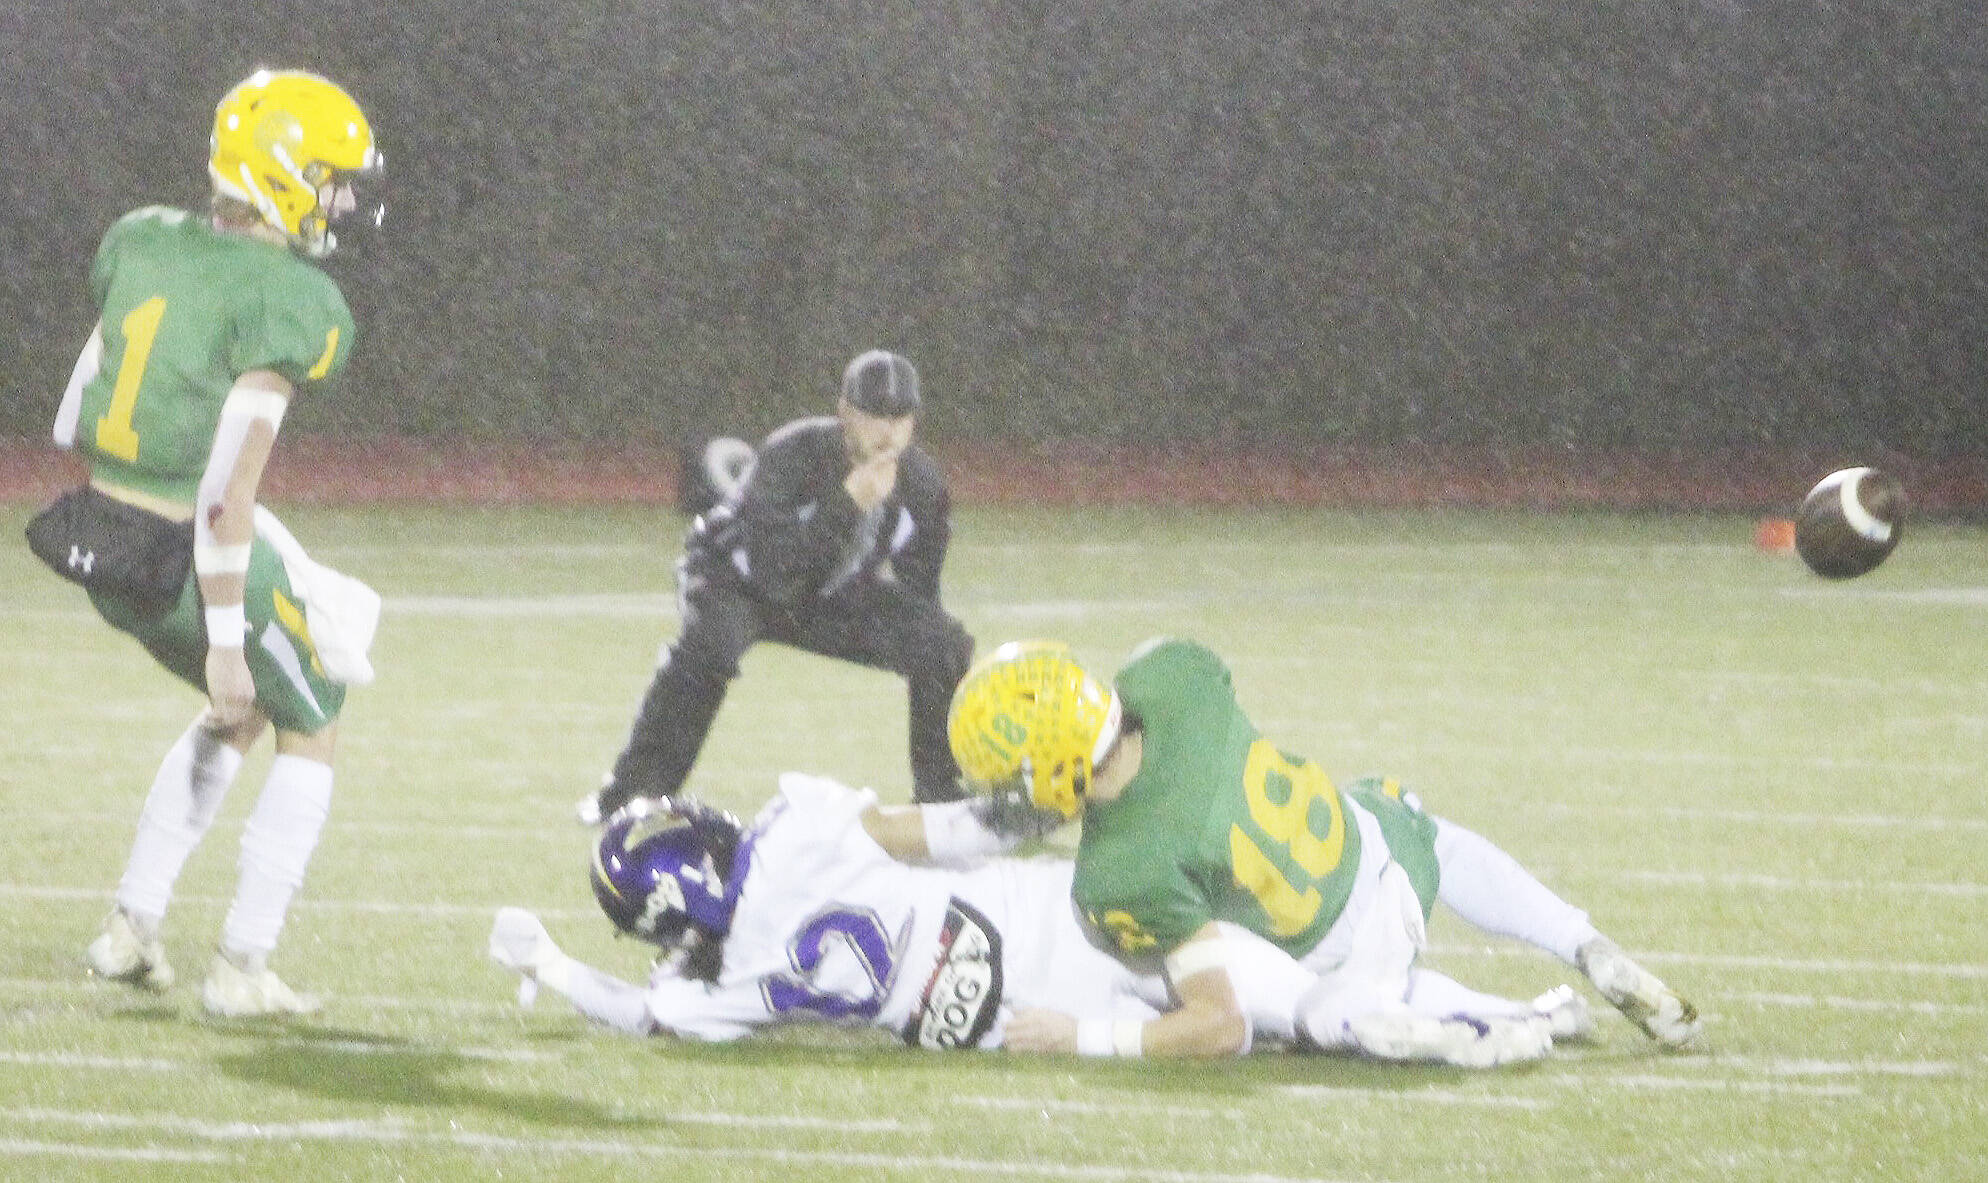 Viking Lincoln Castillo (12) is tackled to the ground as the incomplete pass flies by.